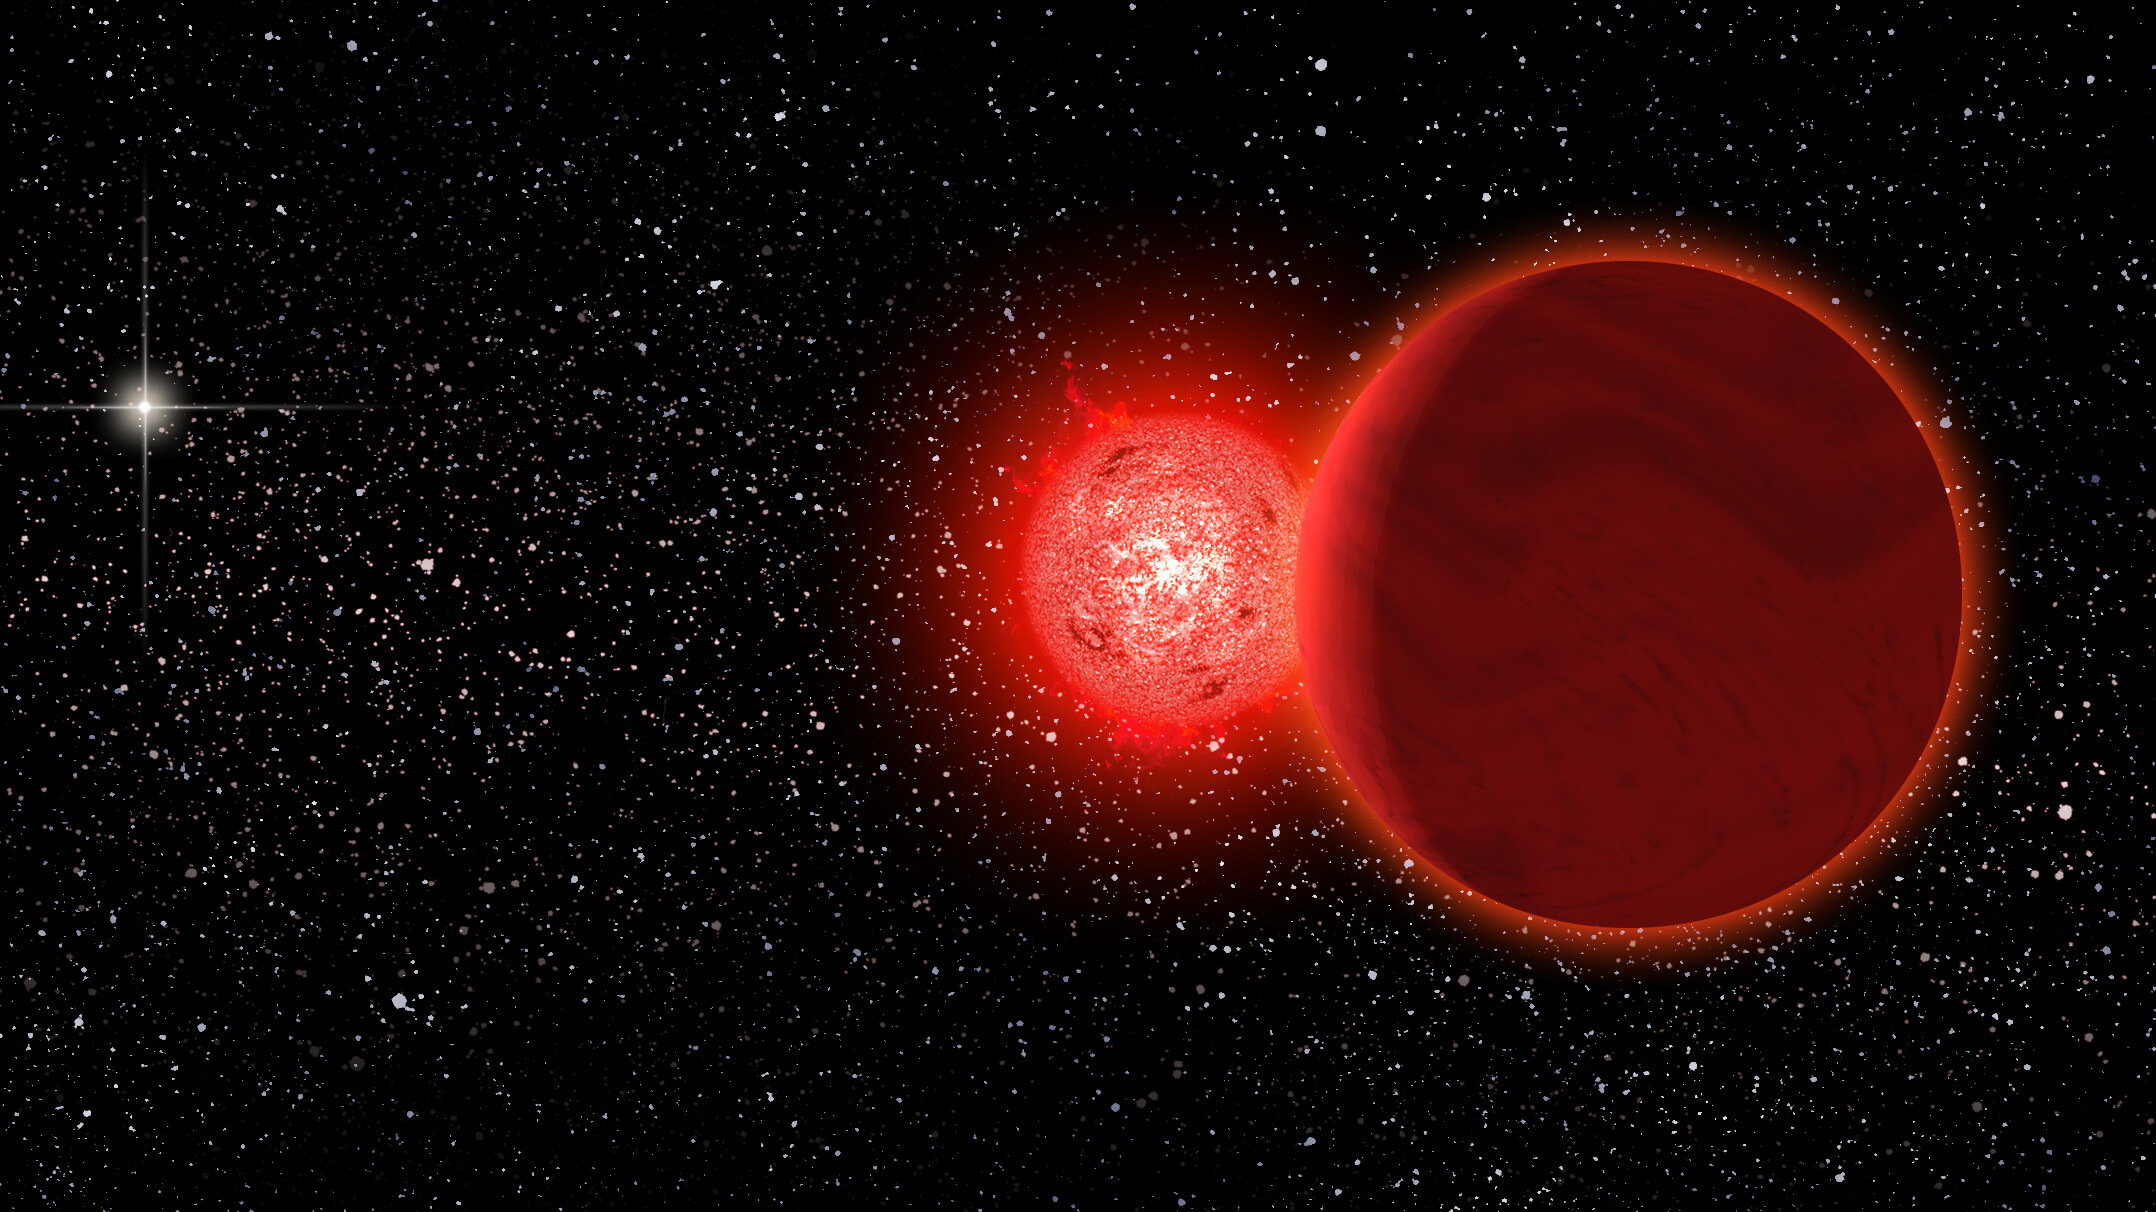 At the time when modern man emerged from the shadows, and the Neanderthals were close to extinction, a double star system passed by the far reaches of the solar system. (Image: Michael Osadciw/University of Rochester)